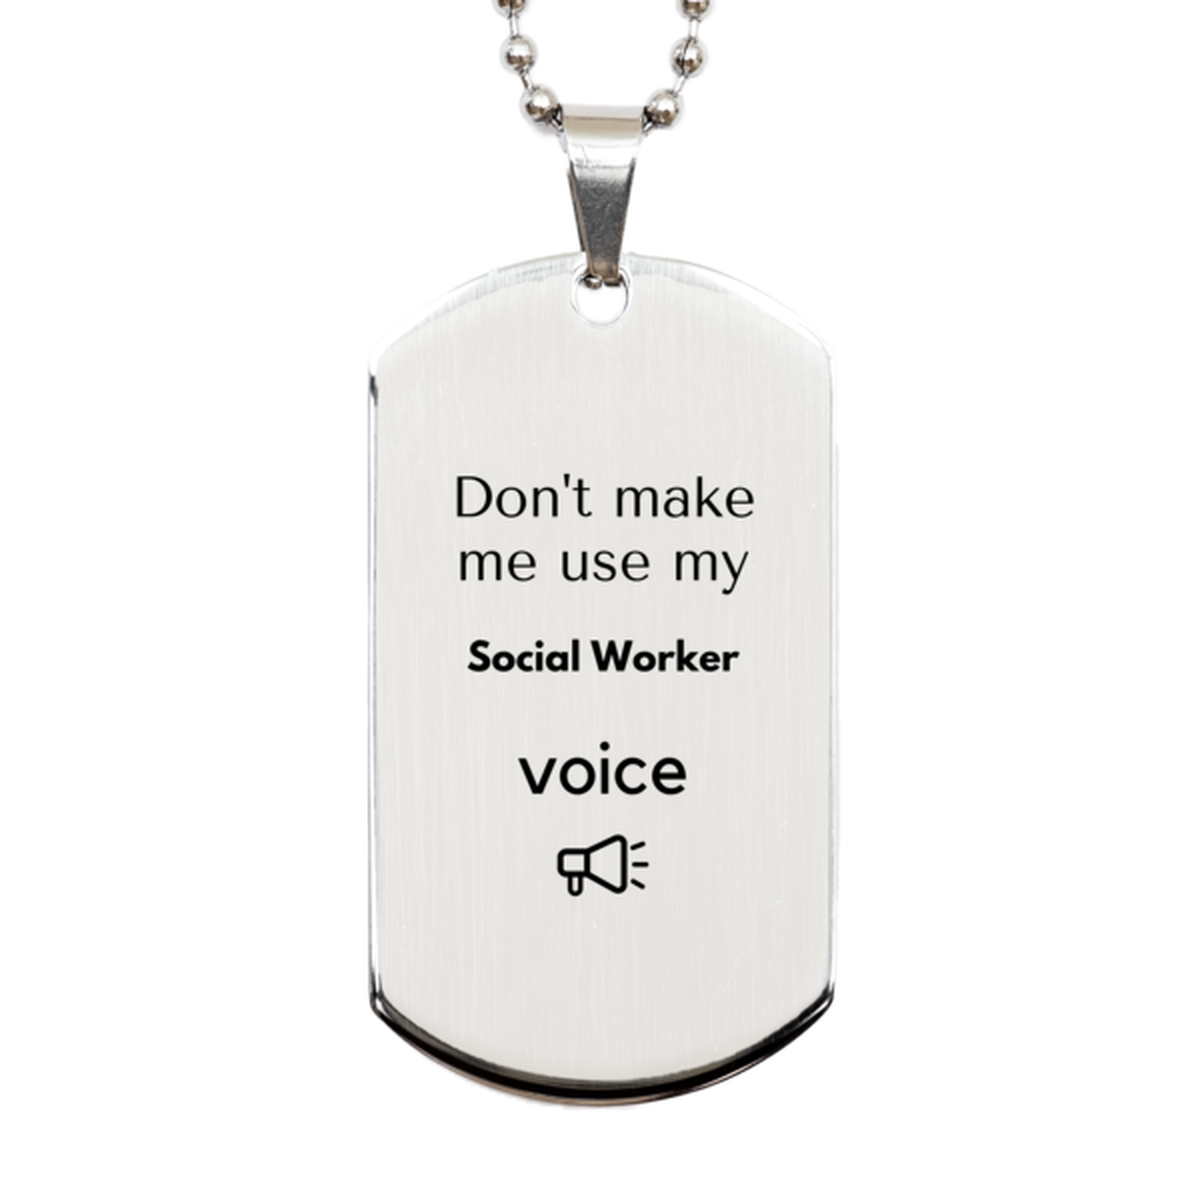 Don't make me use my Social Worker voice, Sarcasm Social Worker Gifts, Christmas Social Worker Silver Dog Tag Birthday Unique Gifts For Social Worker Coworkers, Men, Women, Colleague, Friends